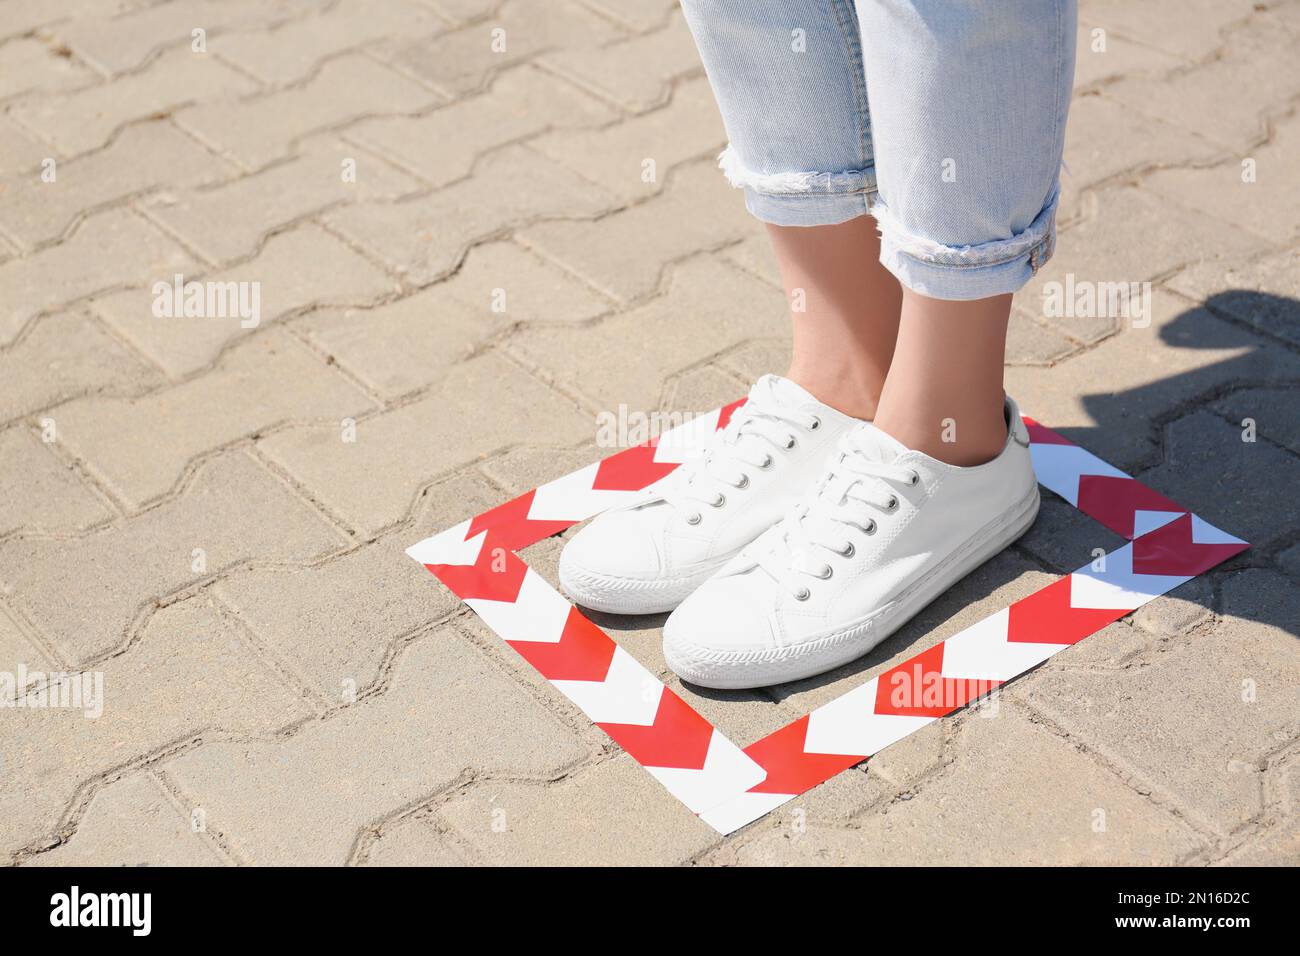 Woman standing on taped floor marking for social distance outdoors, closeup with space for text. Coronavirus pandemic Stock Photo